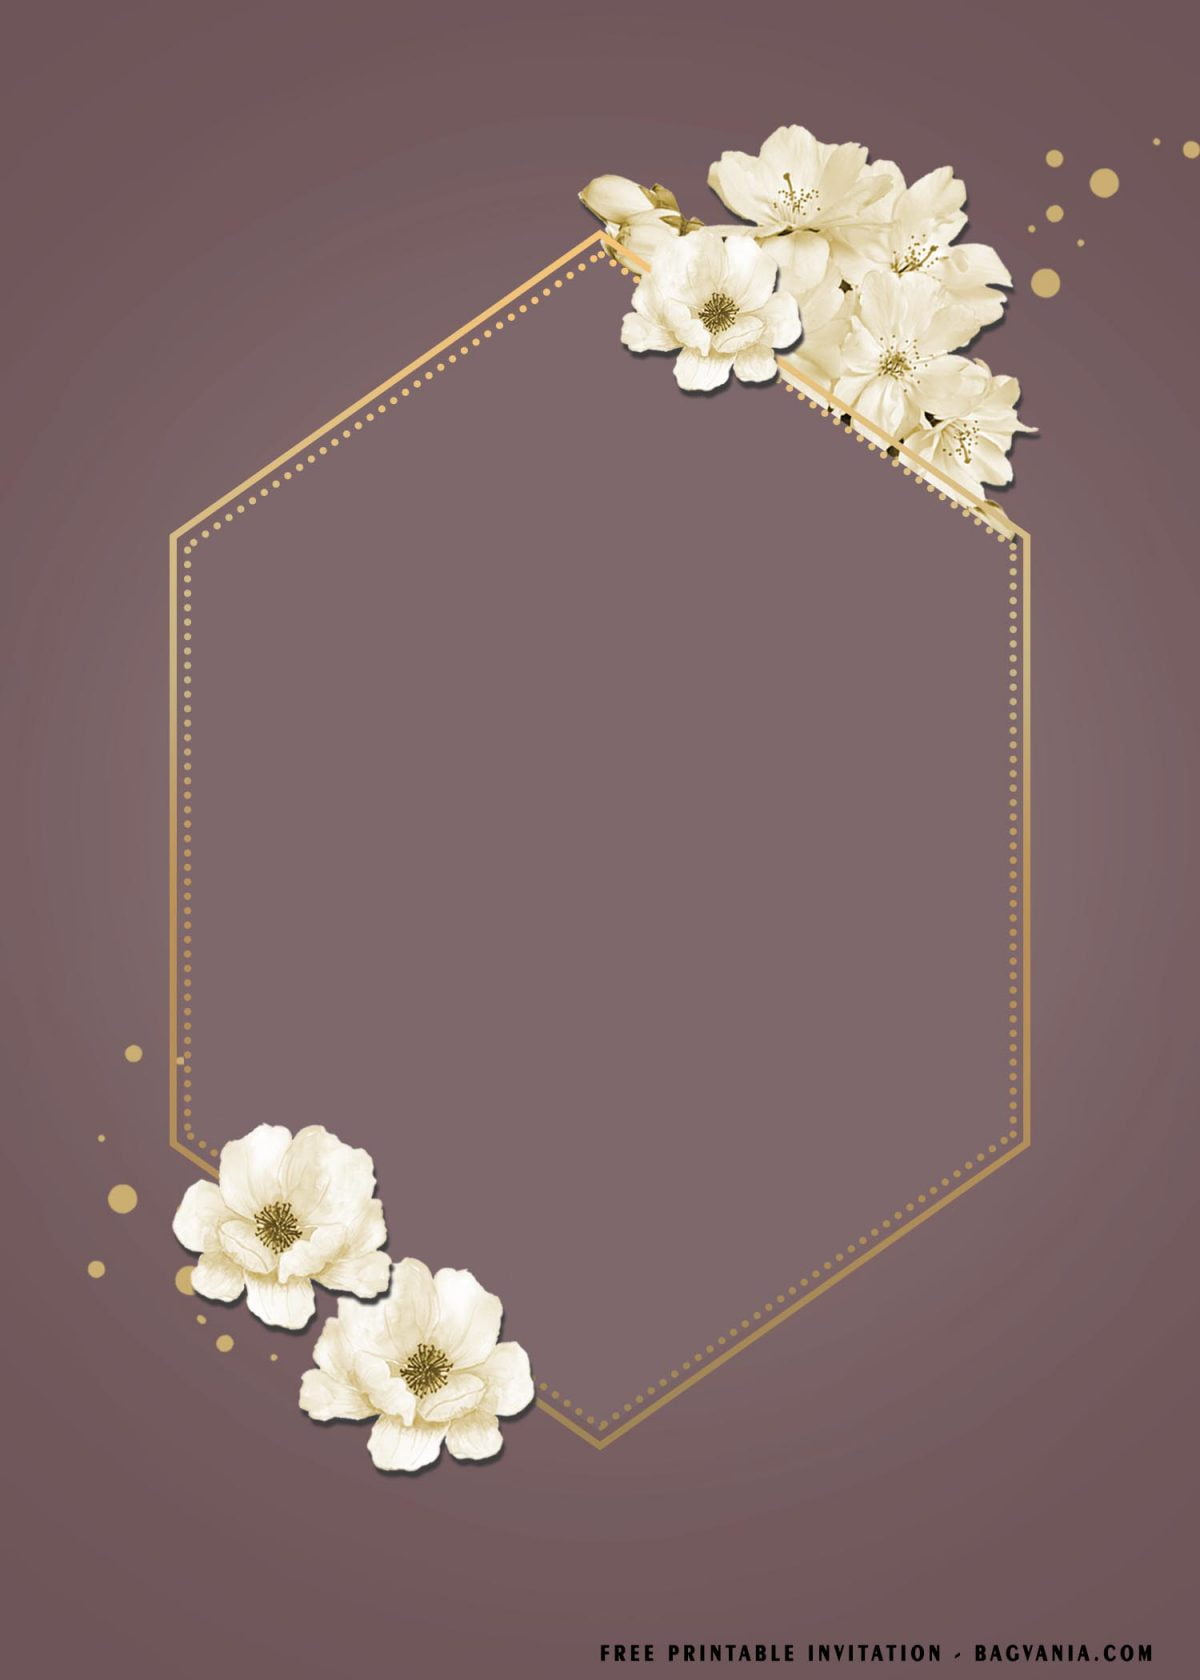 Free Printable Cherry Blossom Baby Shower Invitation Templates With Gold Text Frame